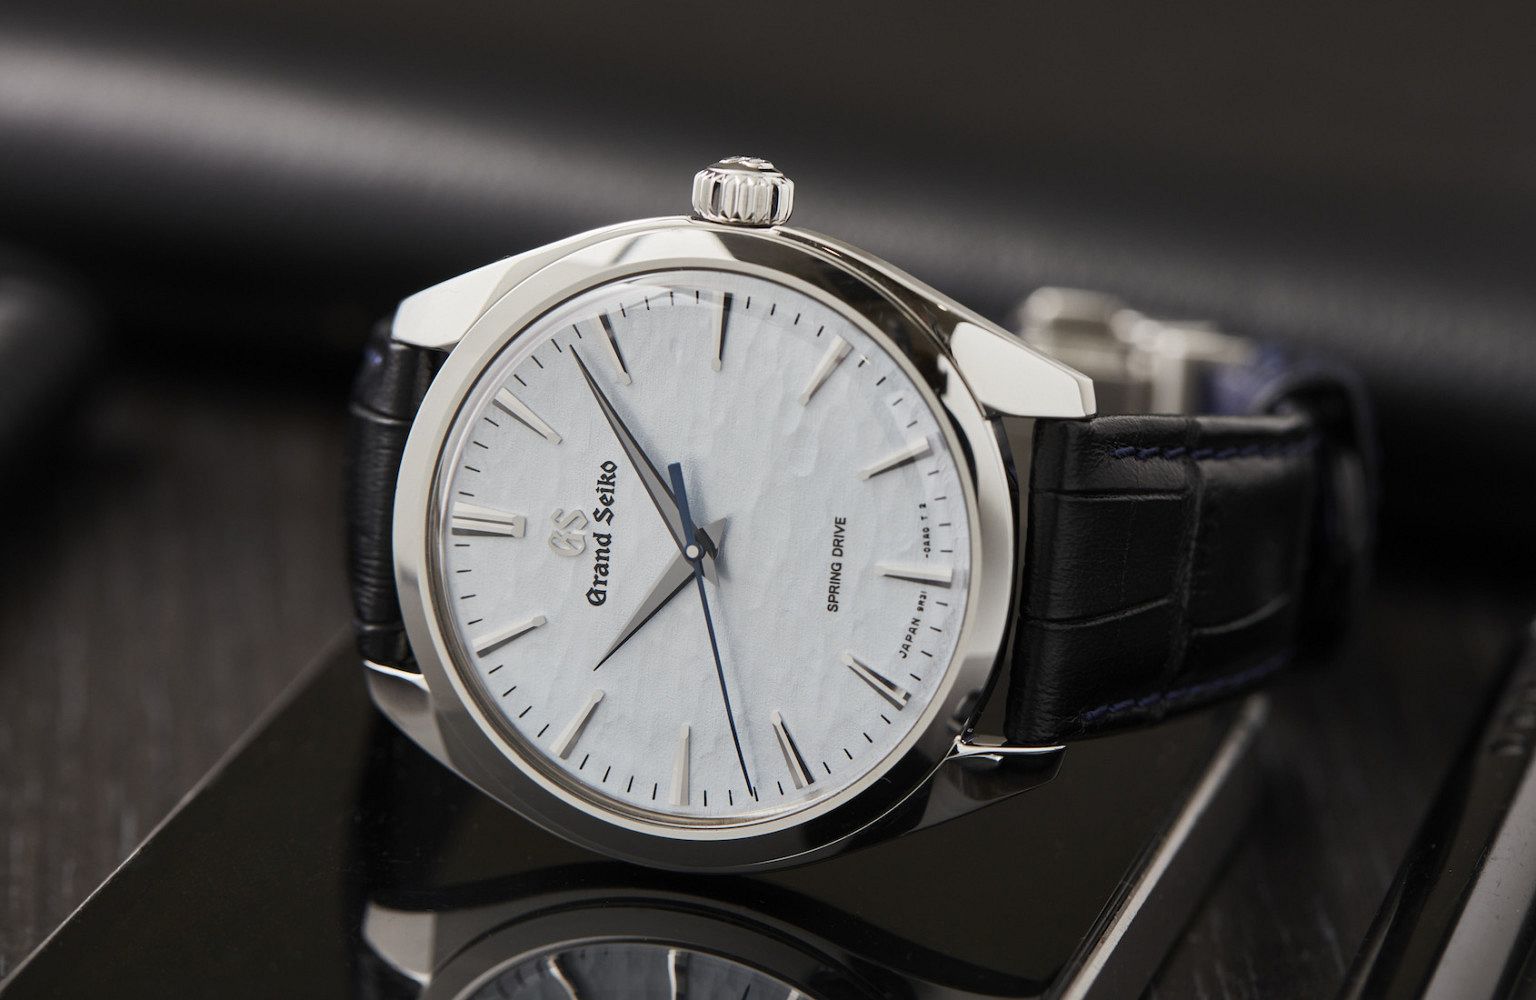 HANDS-ON: The Grand Seiko SBGY007 stuns with simplicity